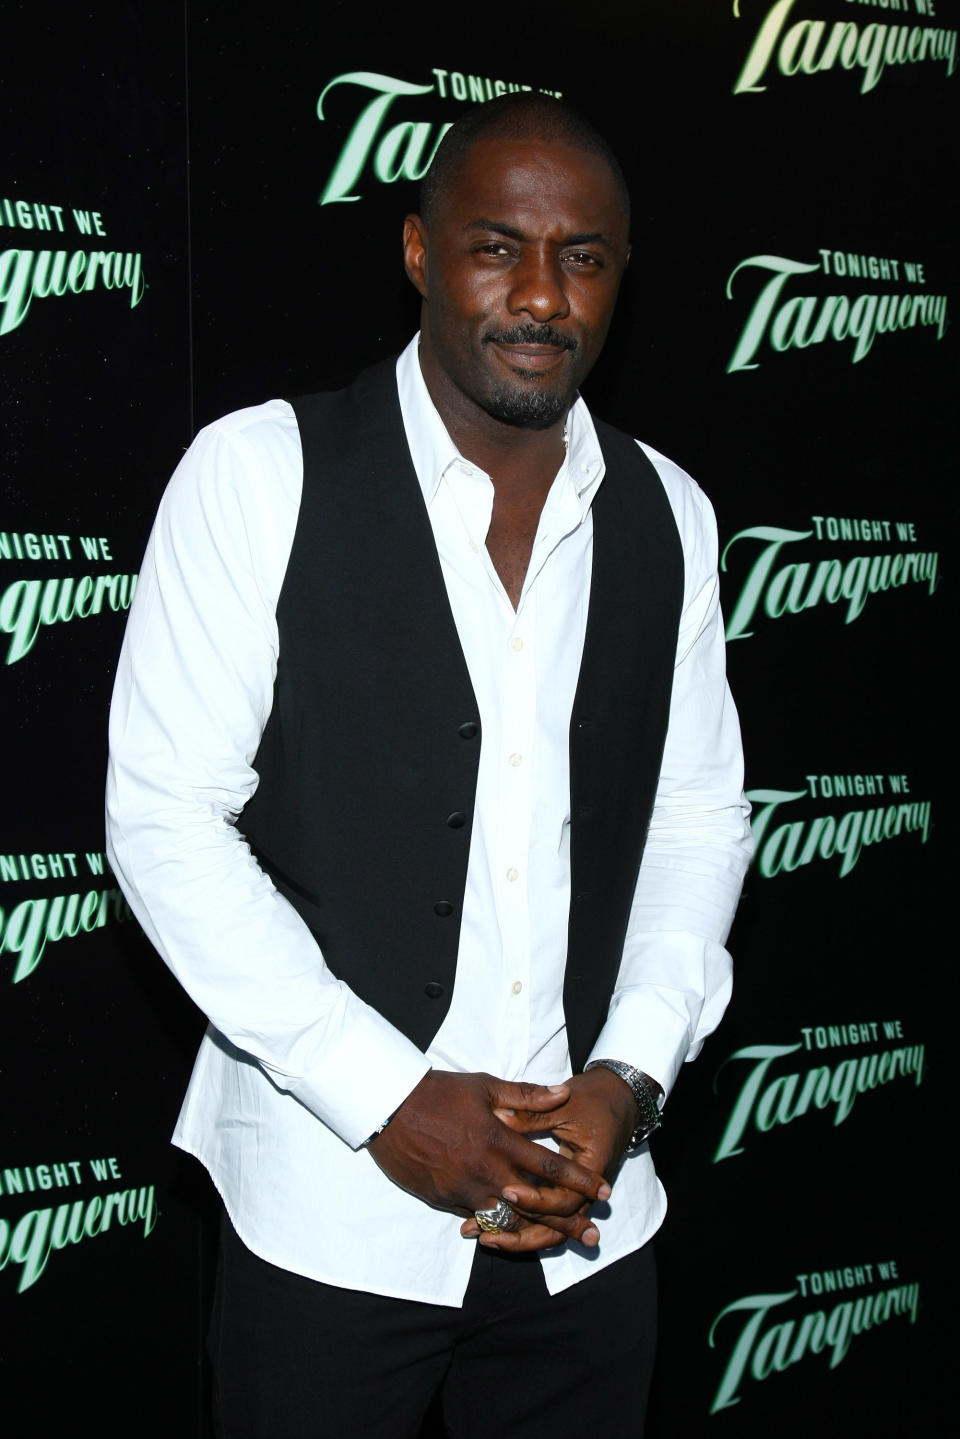 NEW YORK, NY - JULY 13:  Actor Idris Elba Launches 'Tonight We Tanqueray' at The Green Building on July 13, 2011 in New York, United States.  (Photo by Neilson Barnard/Getty Images for Tanqueray)